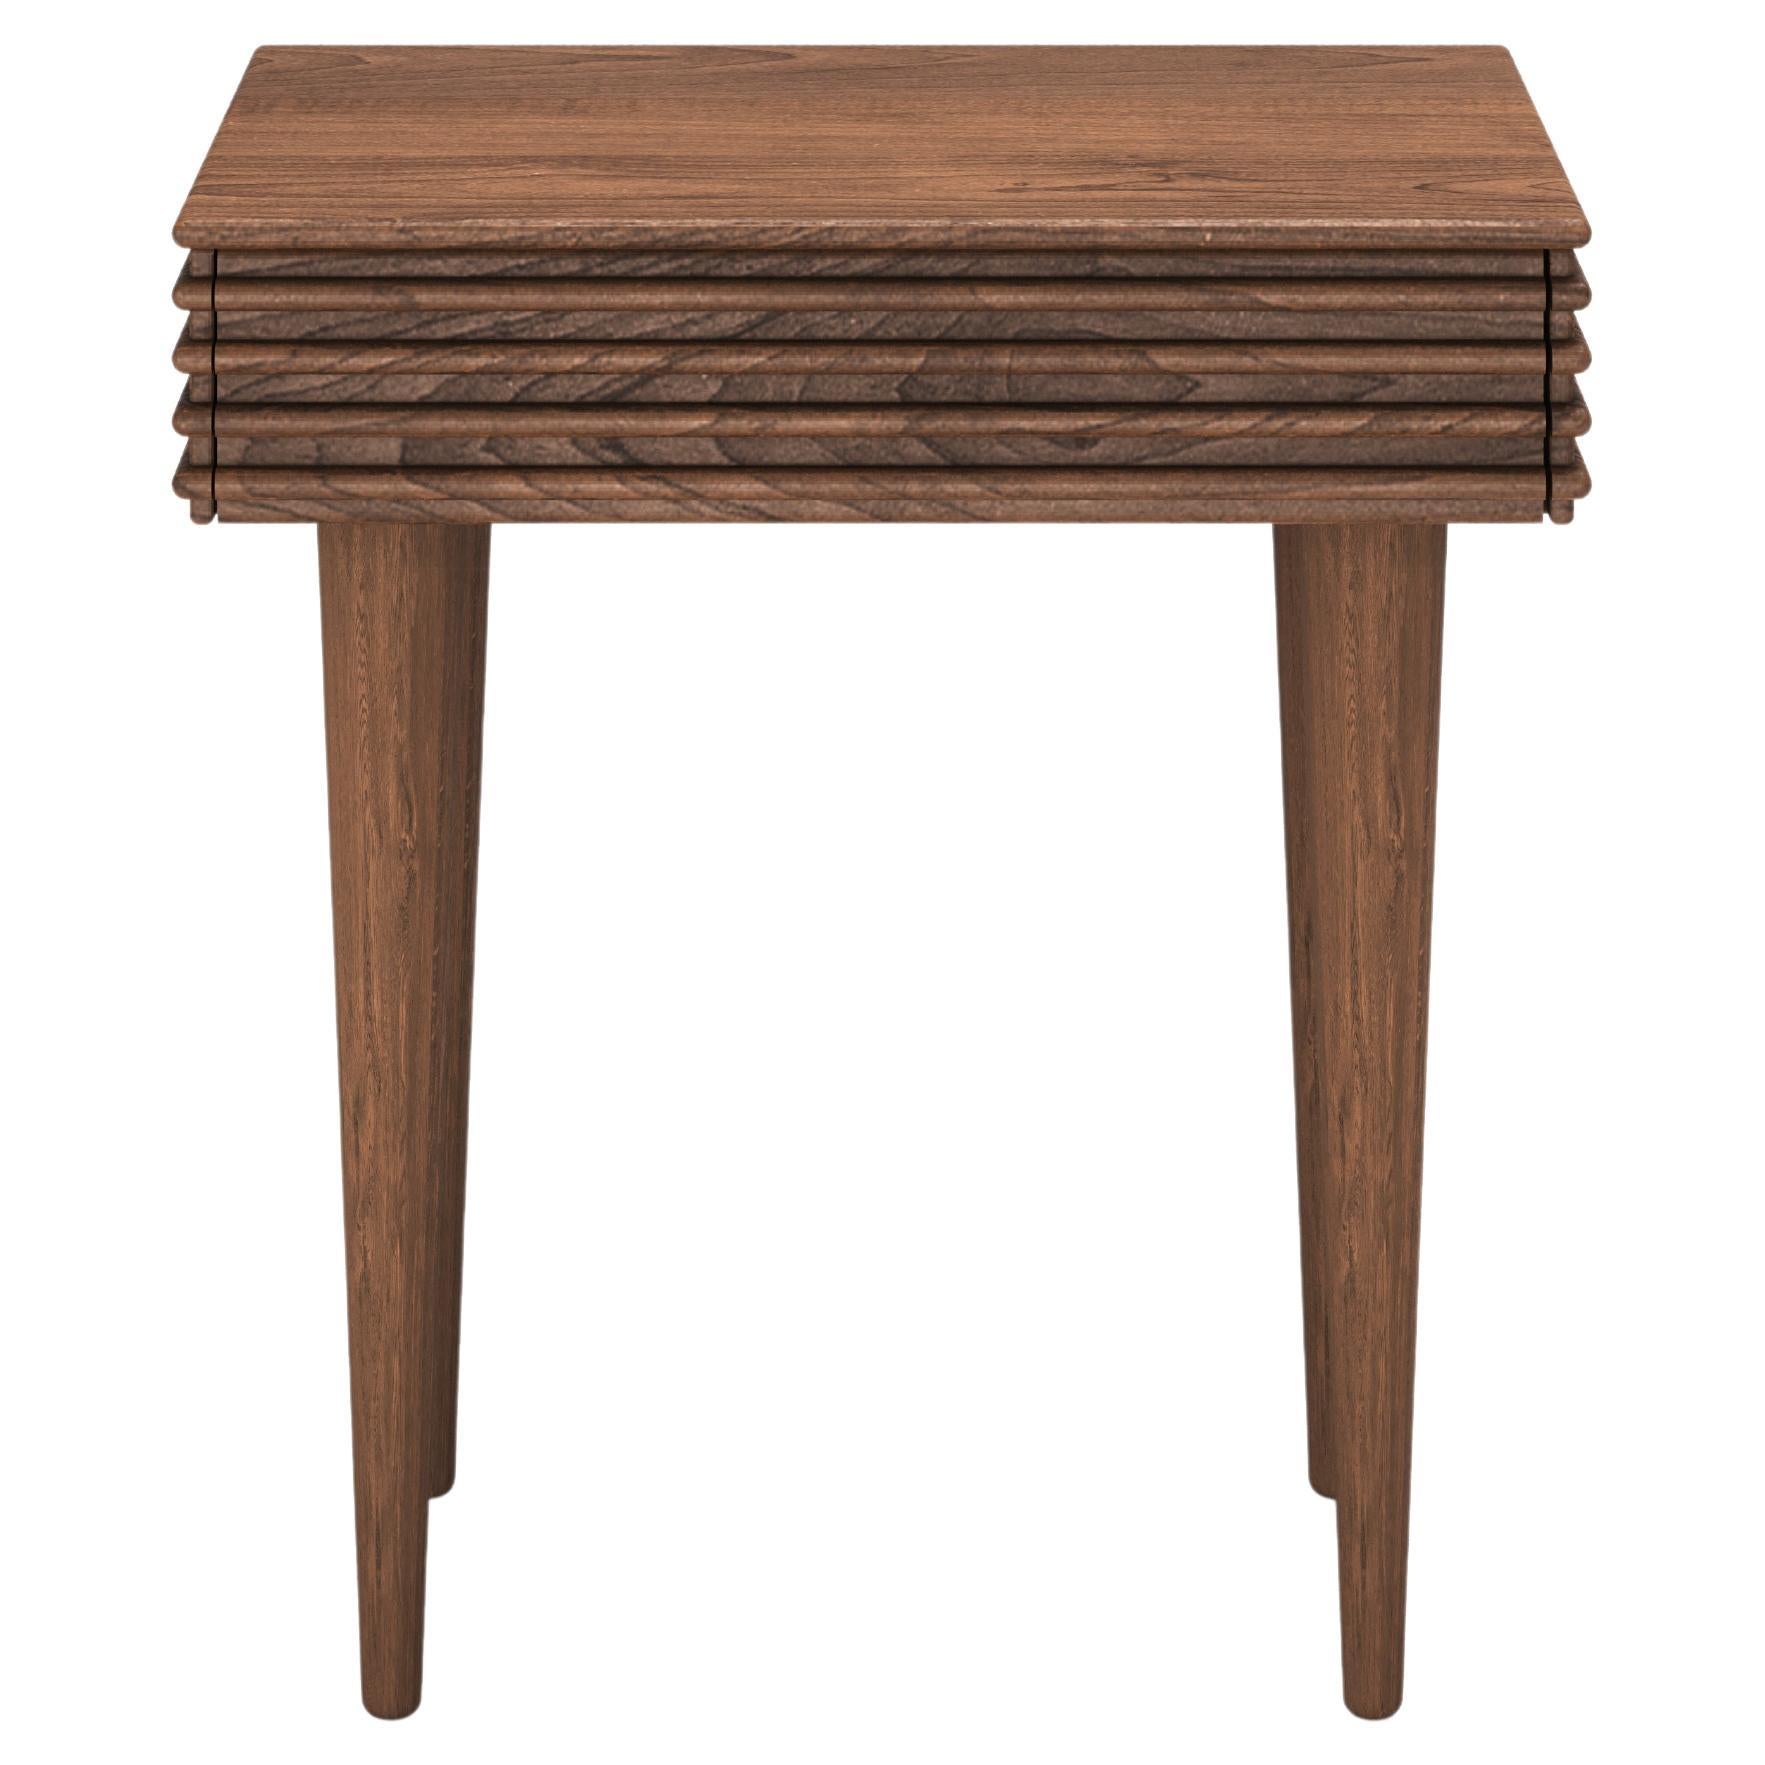 Contemporary Night Table 'Groove' by DK3, Walnut, S 35 cm, More Wood Finishes For Sale